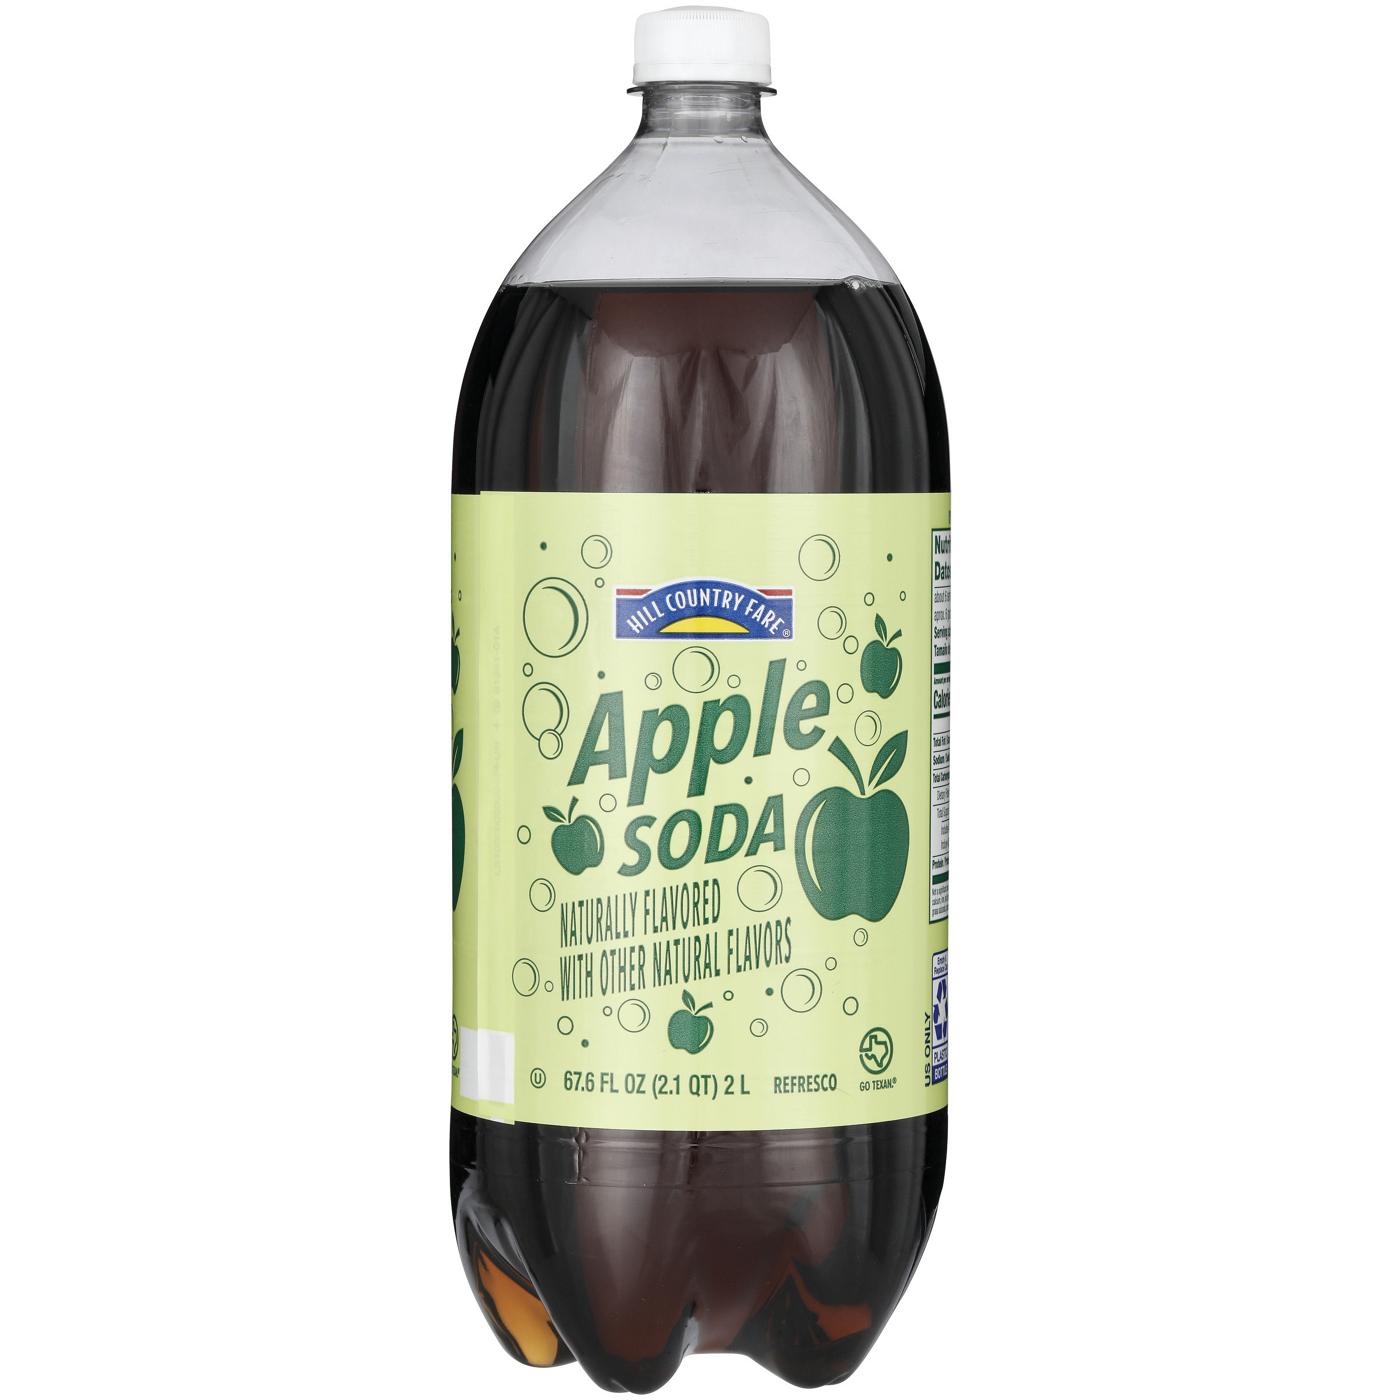 HCF Hill Country Fair Apple Soda; image 1 of 2